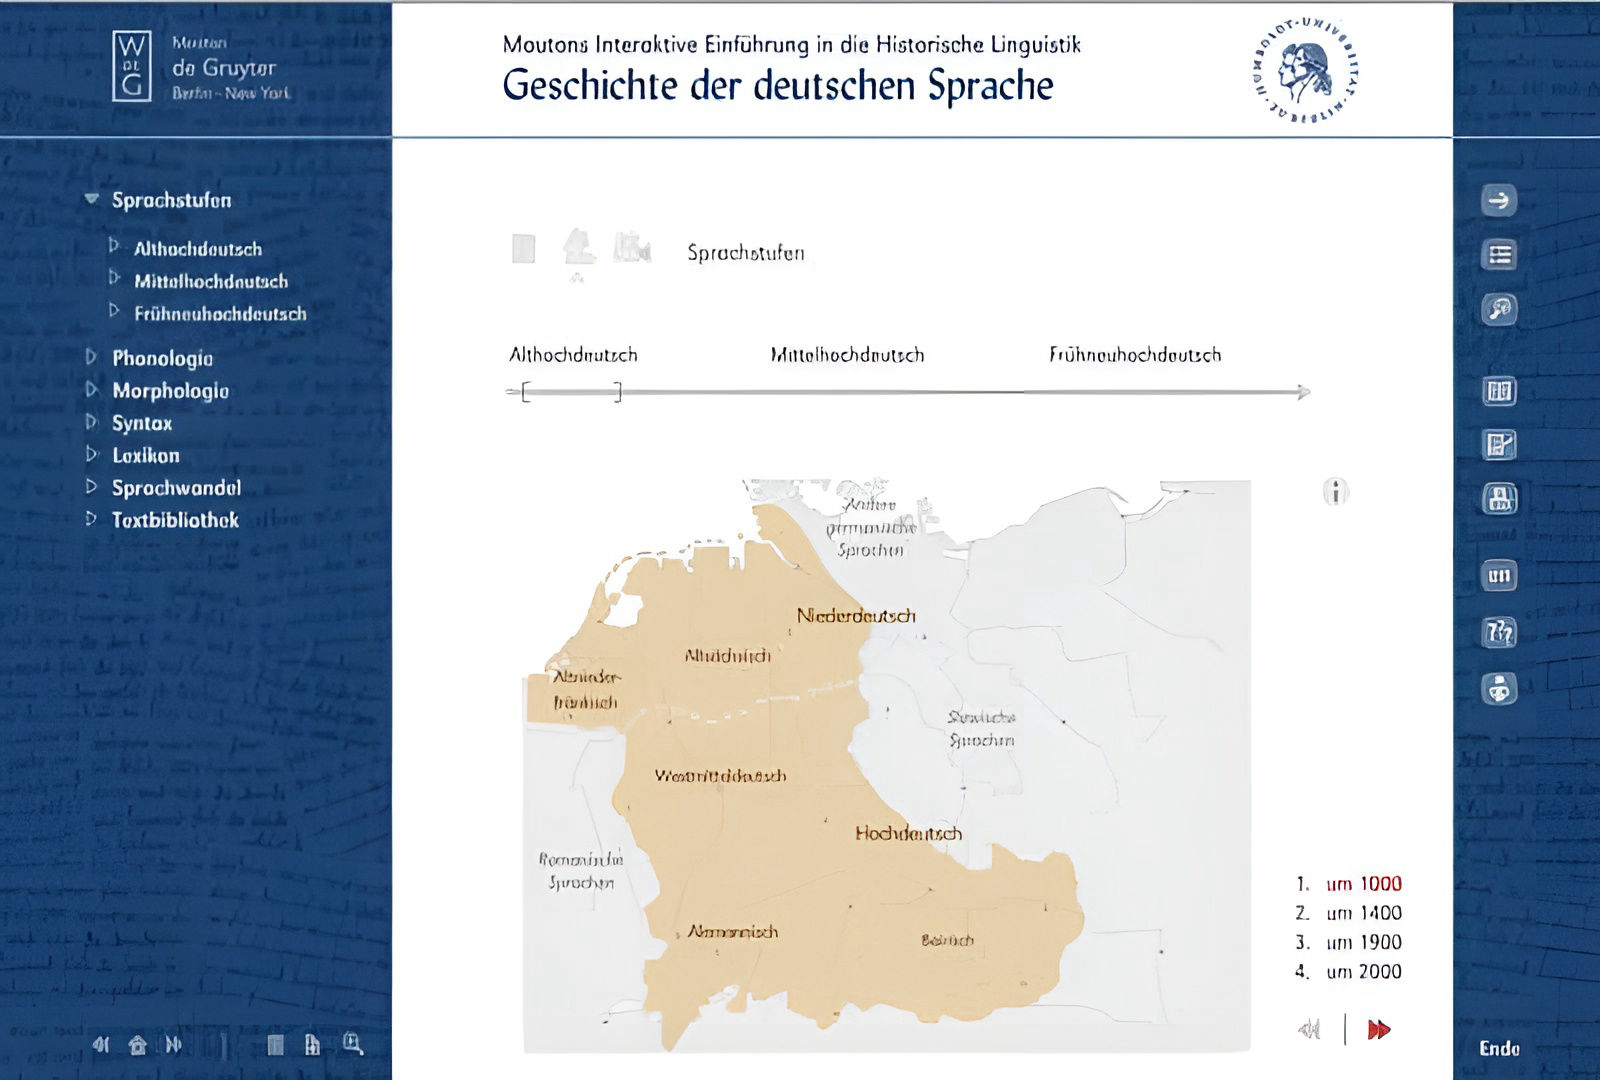 The Mouton Interactive Introduction to Historical Linguistics of German, 2007